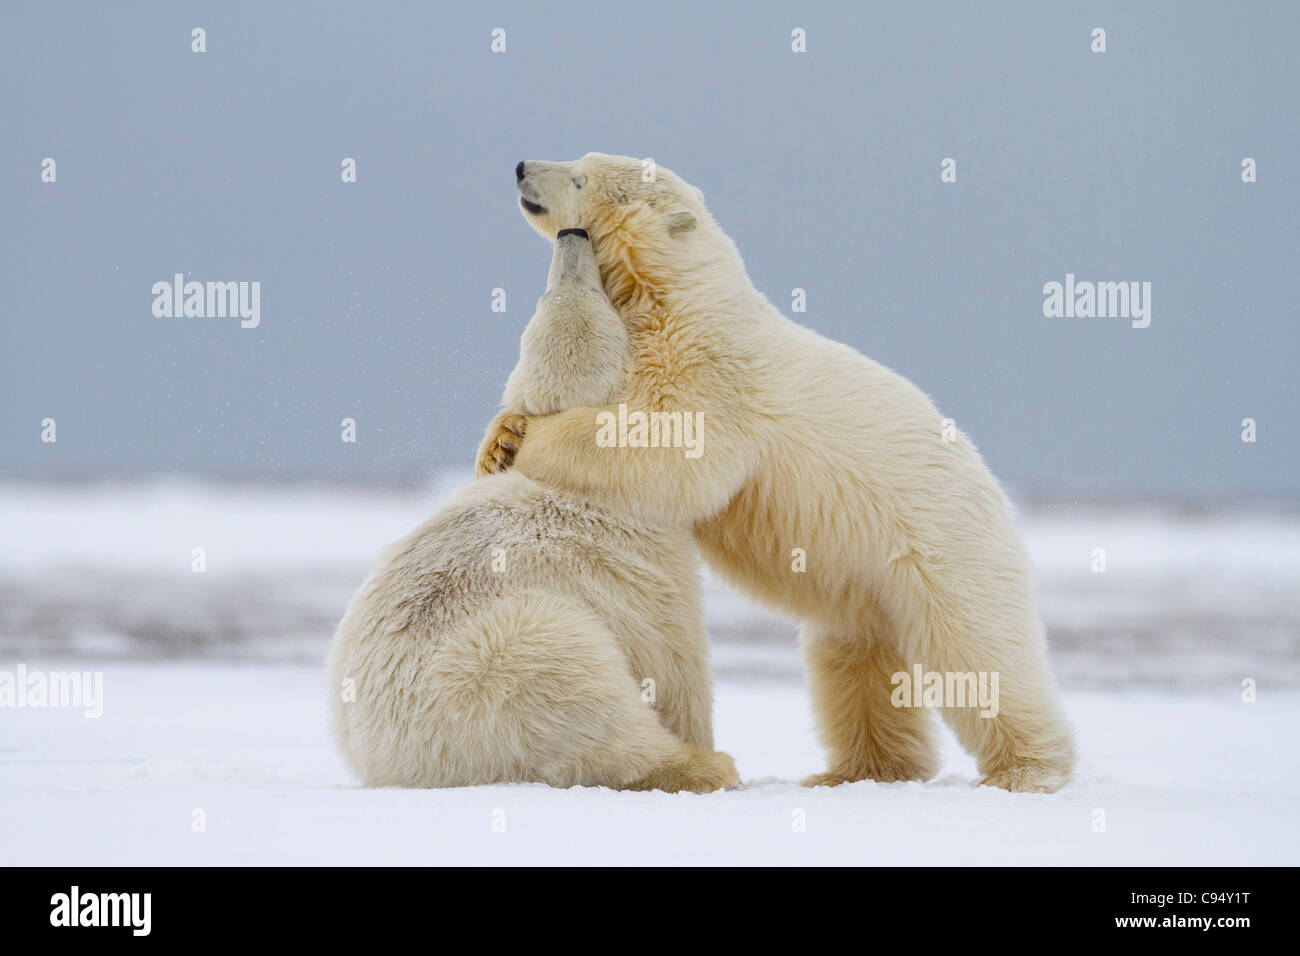 Two Polar Bear cubs (Ursus maritimus) playing in snow in the Arctic, one hugging the other, at Kaktovik, Alaska in October Stock Photo